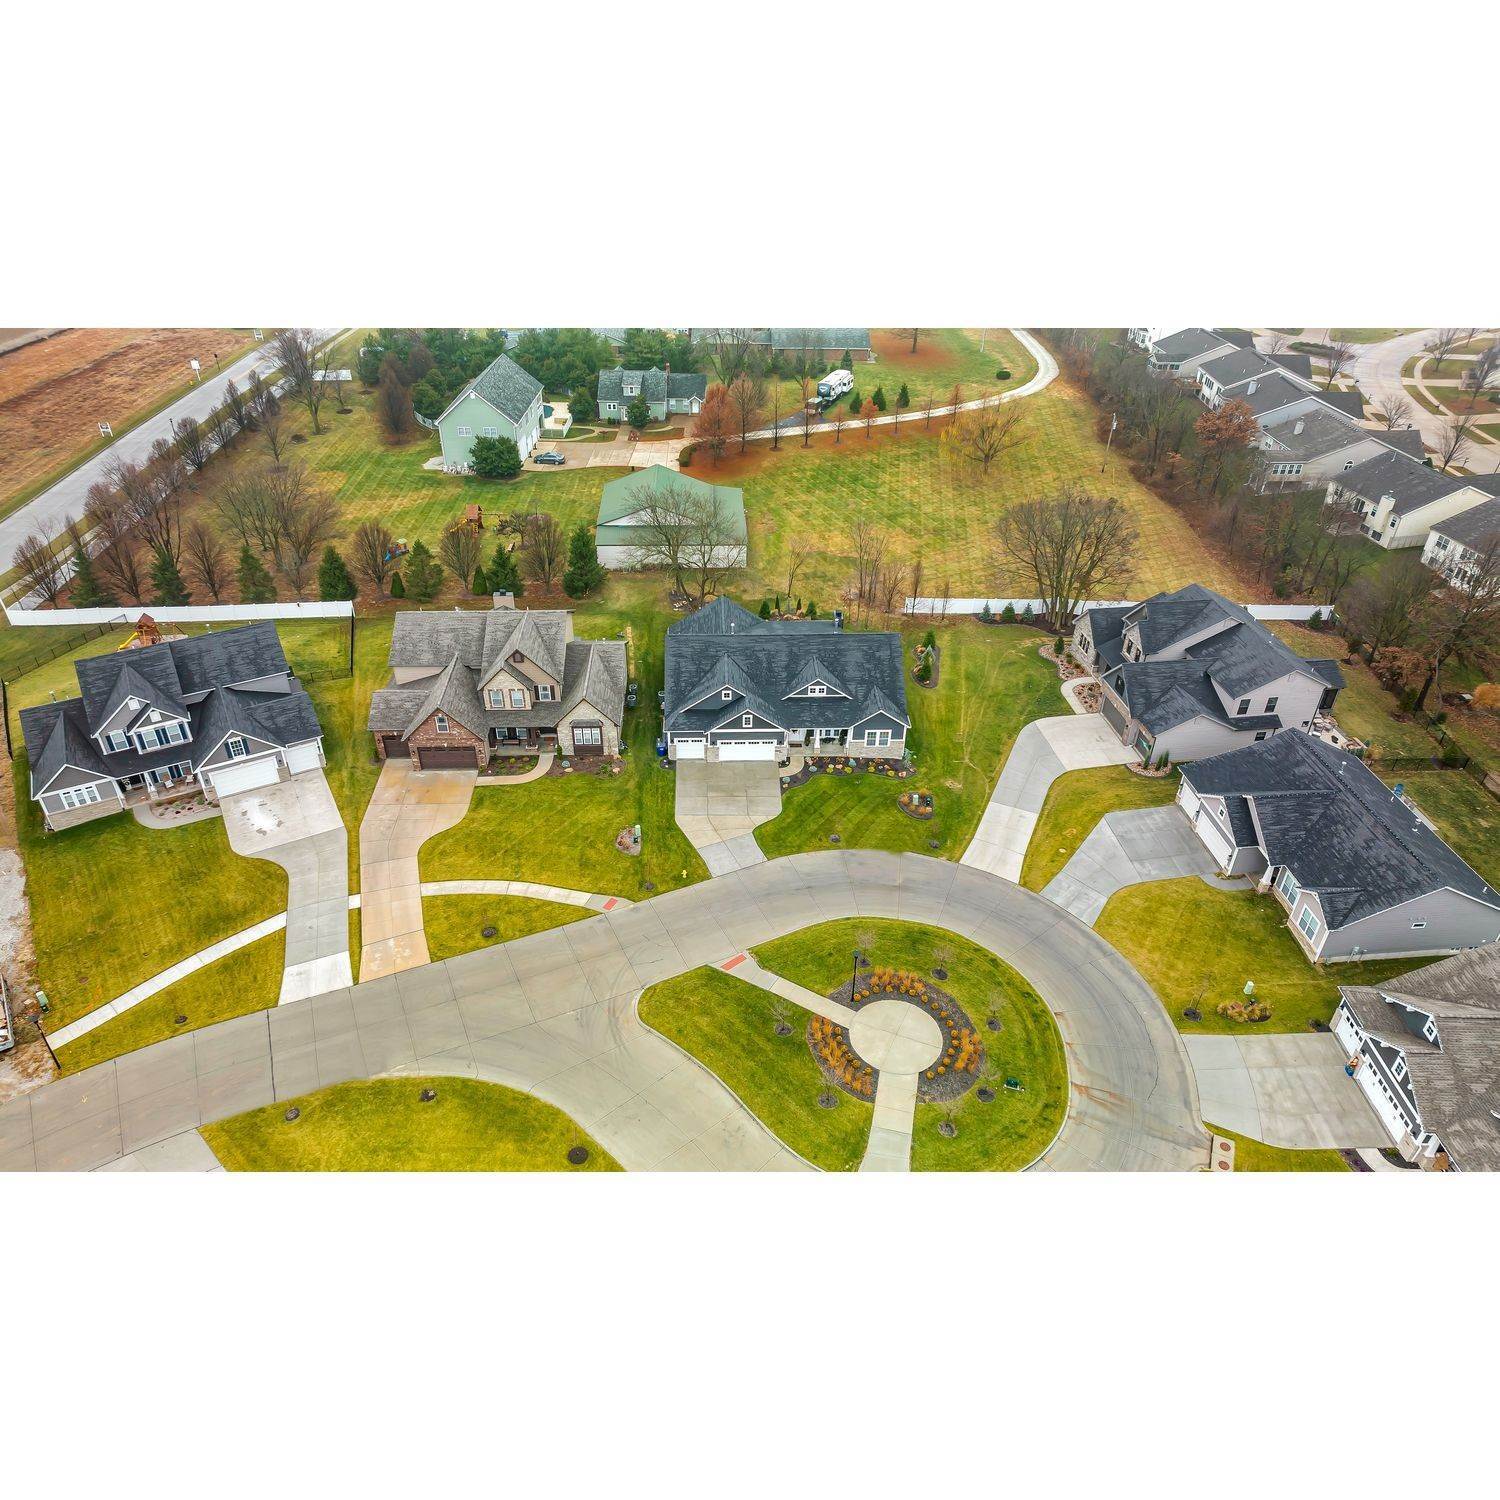 14. xây dựng tại 100 Royal Inverness Parkway, Dardenne Prairie, MO 63368